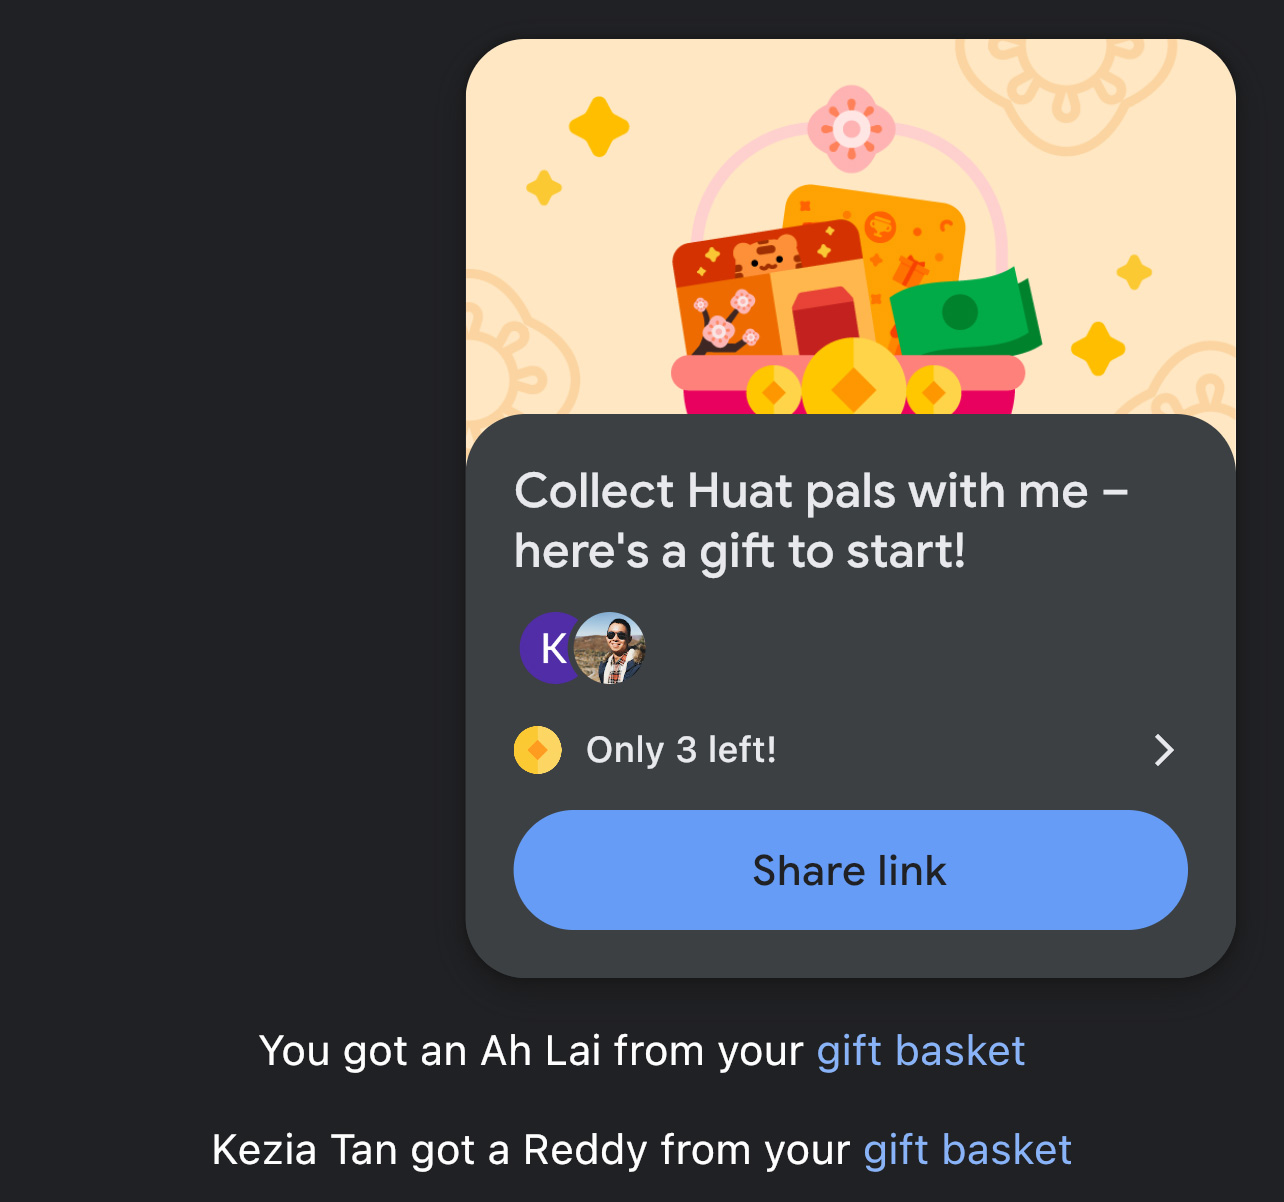 Huat Pals Is A CNY Mini Game On Google Pay To Win Up To $88.88